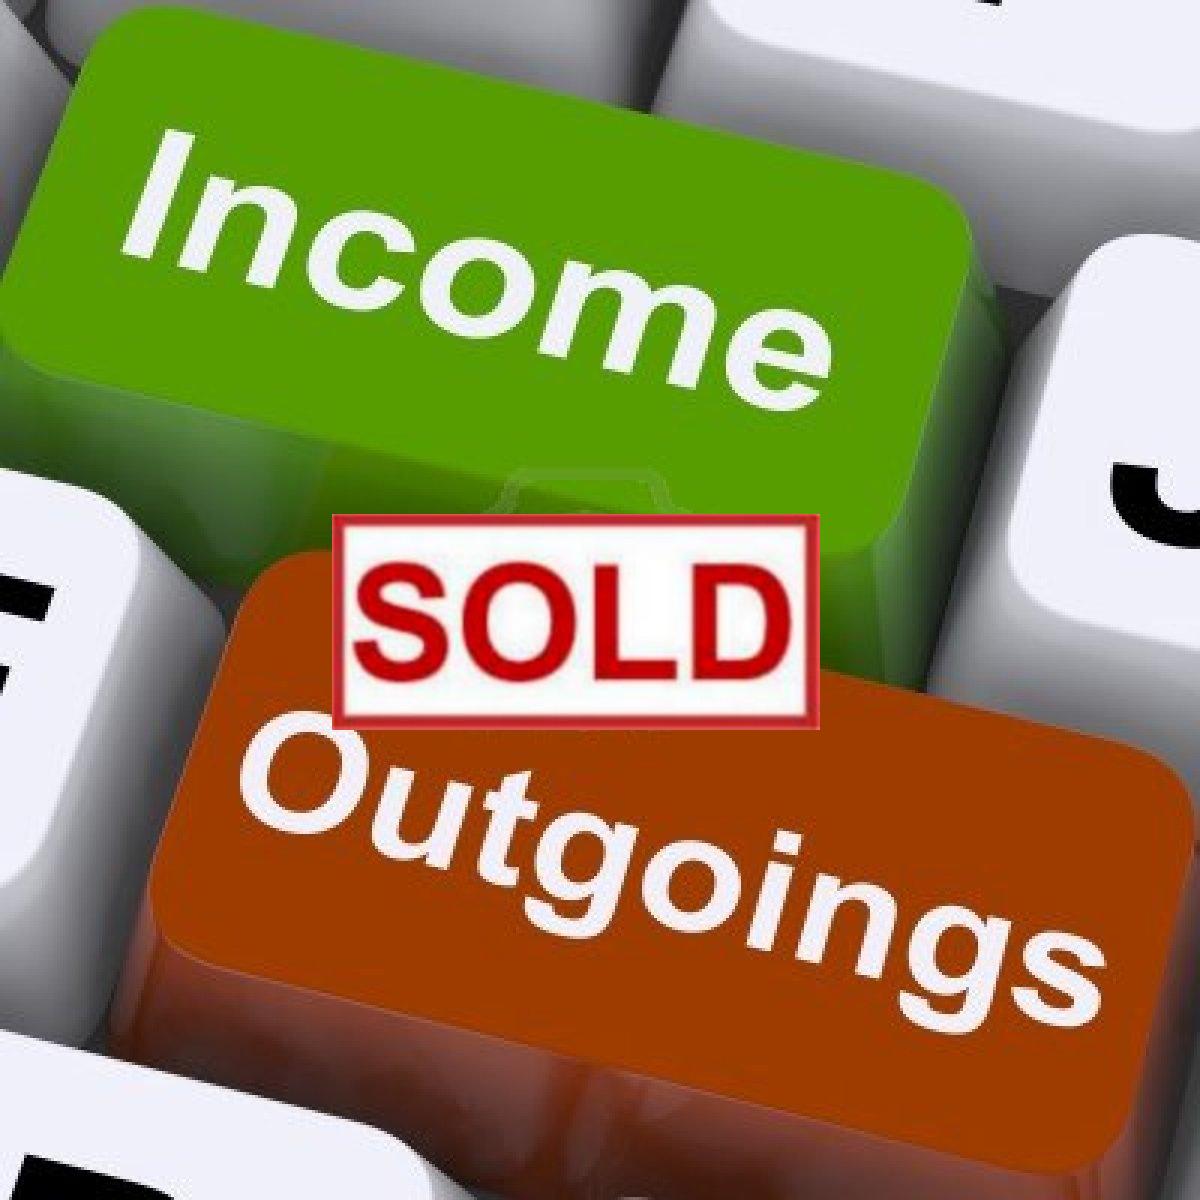 BOOKKEEPING BUSINESS in MELBOURNE - $405k...Business For Sale